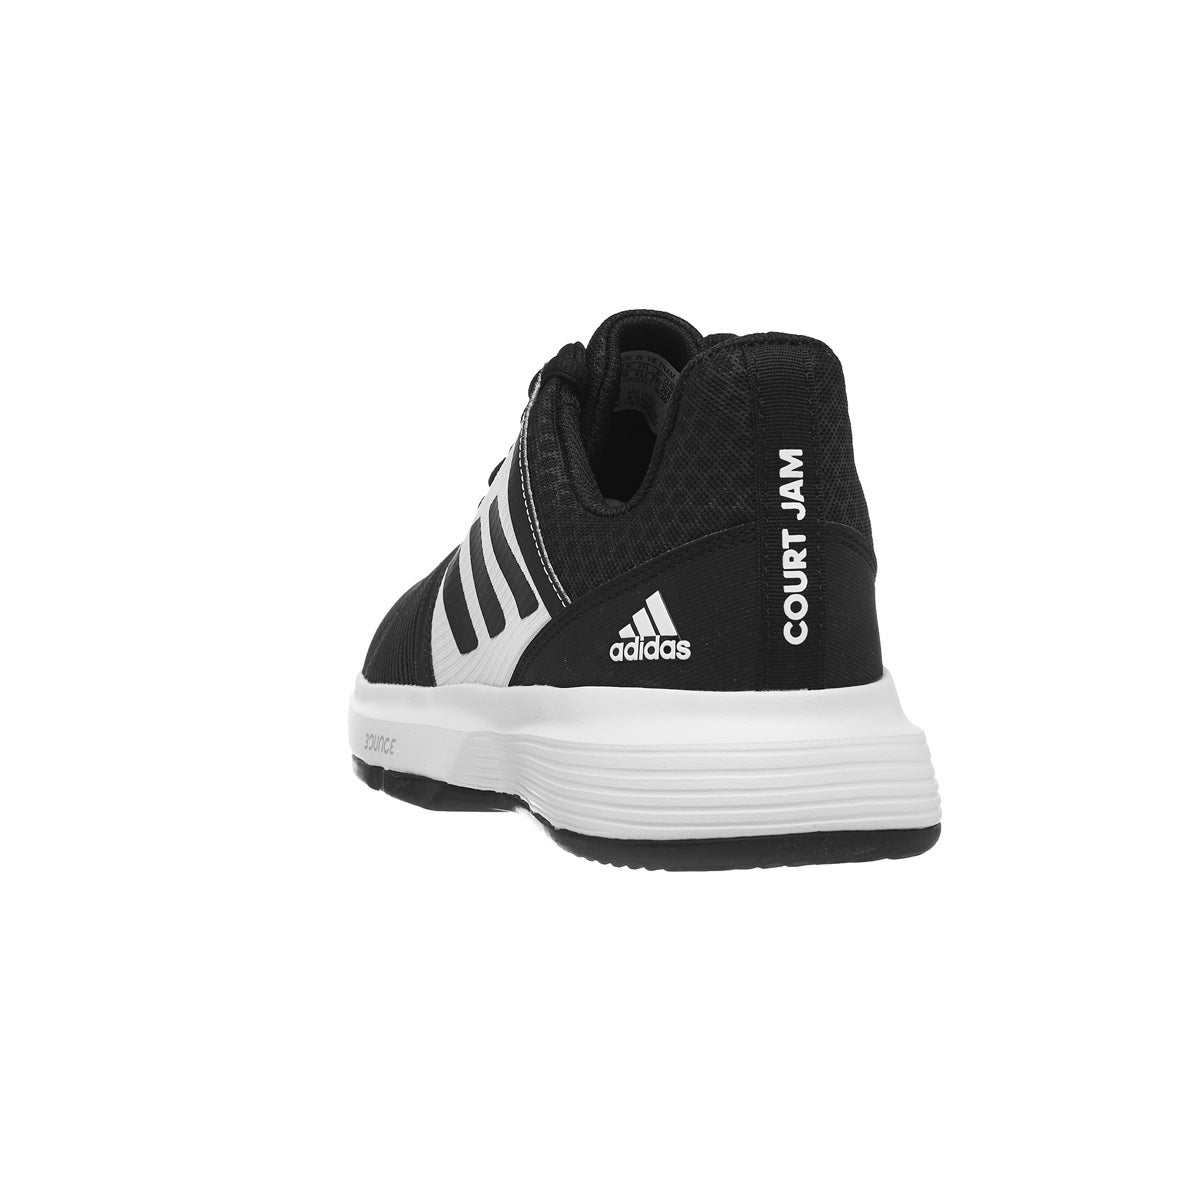 adidas CourtJam Bounce Clay Black/White Men's Shoe 360° View ...